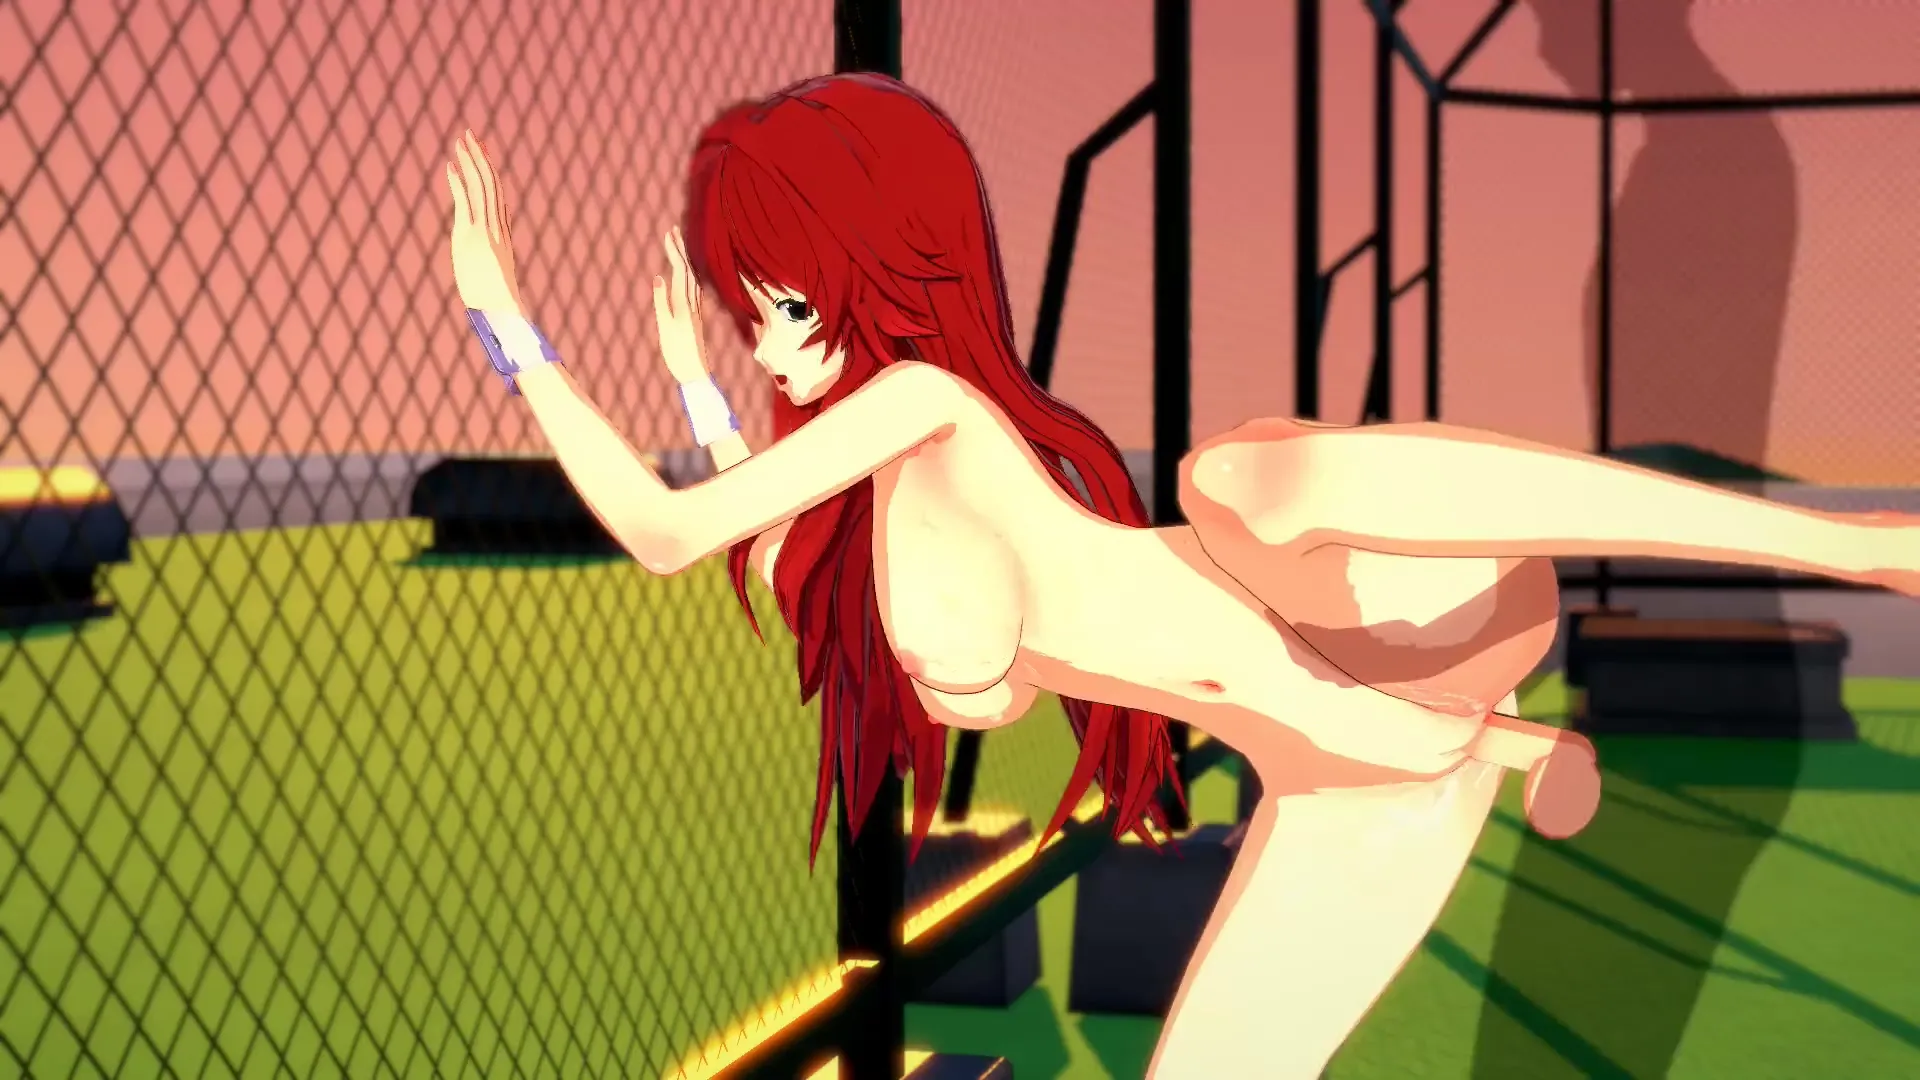 Rias Gremory shadow dick penetration on a schoolyard image